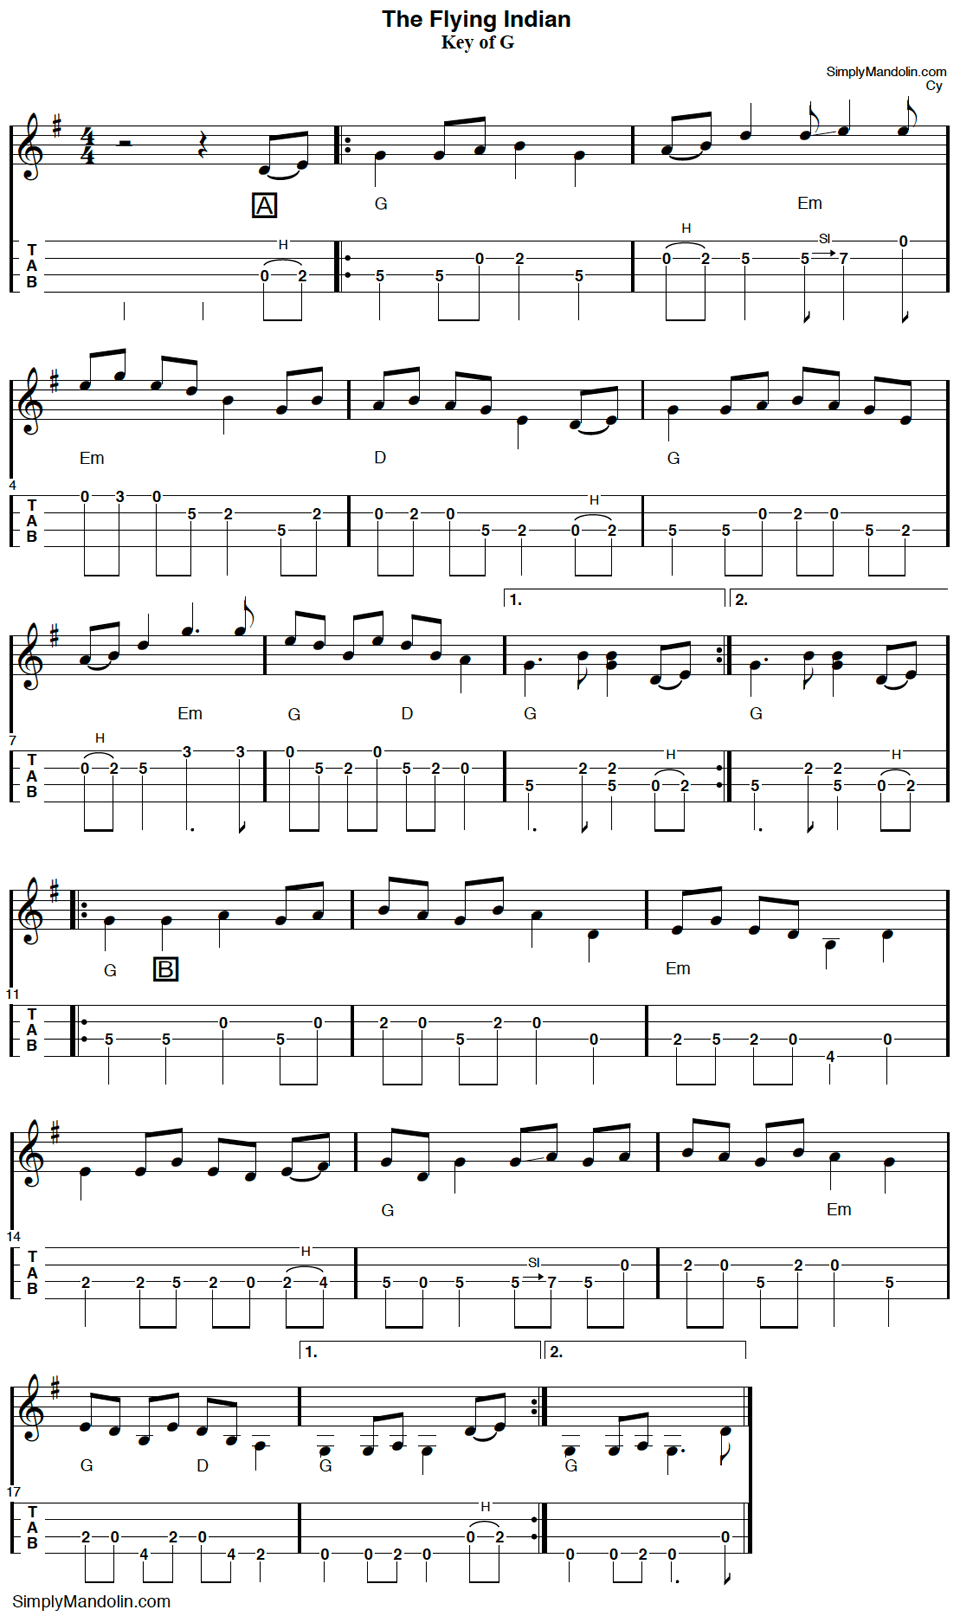 image of mandolin tab & music for the old time fiddle tune "The Flying Indian".